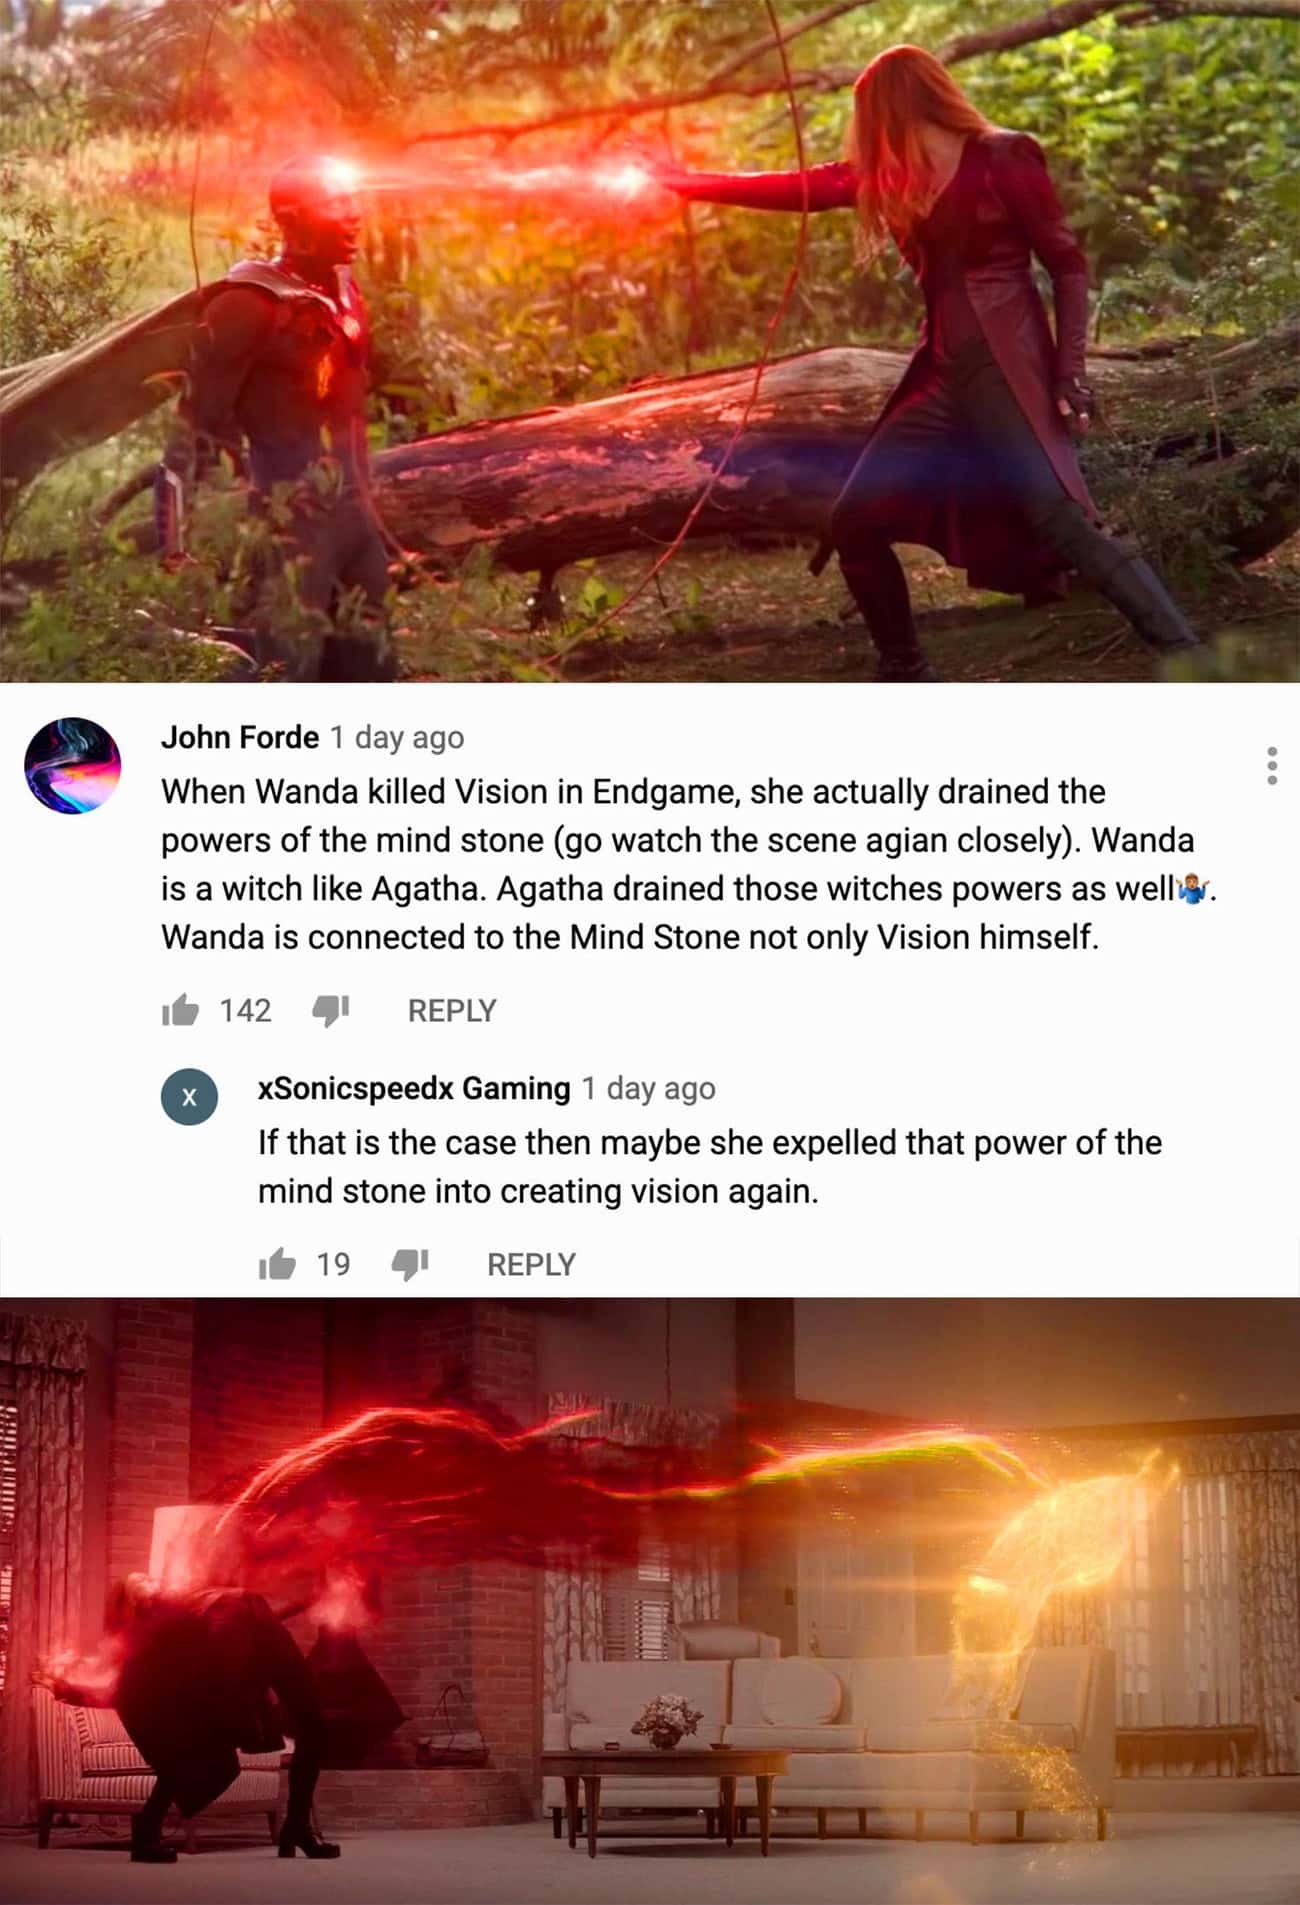 Wanda's Connection To The Mind Stone